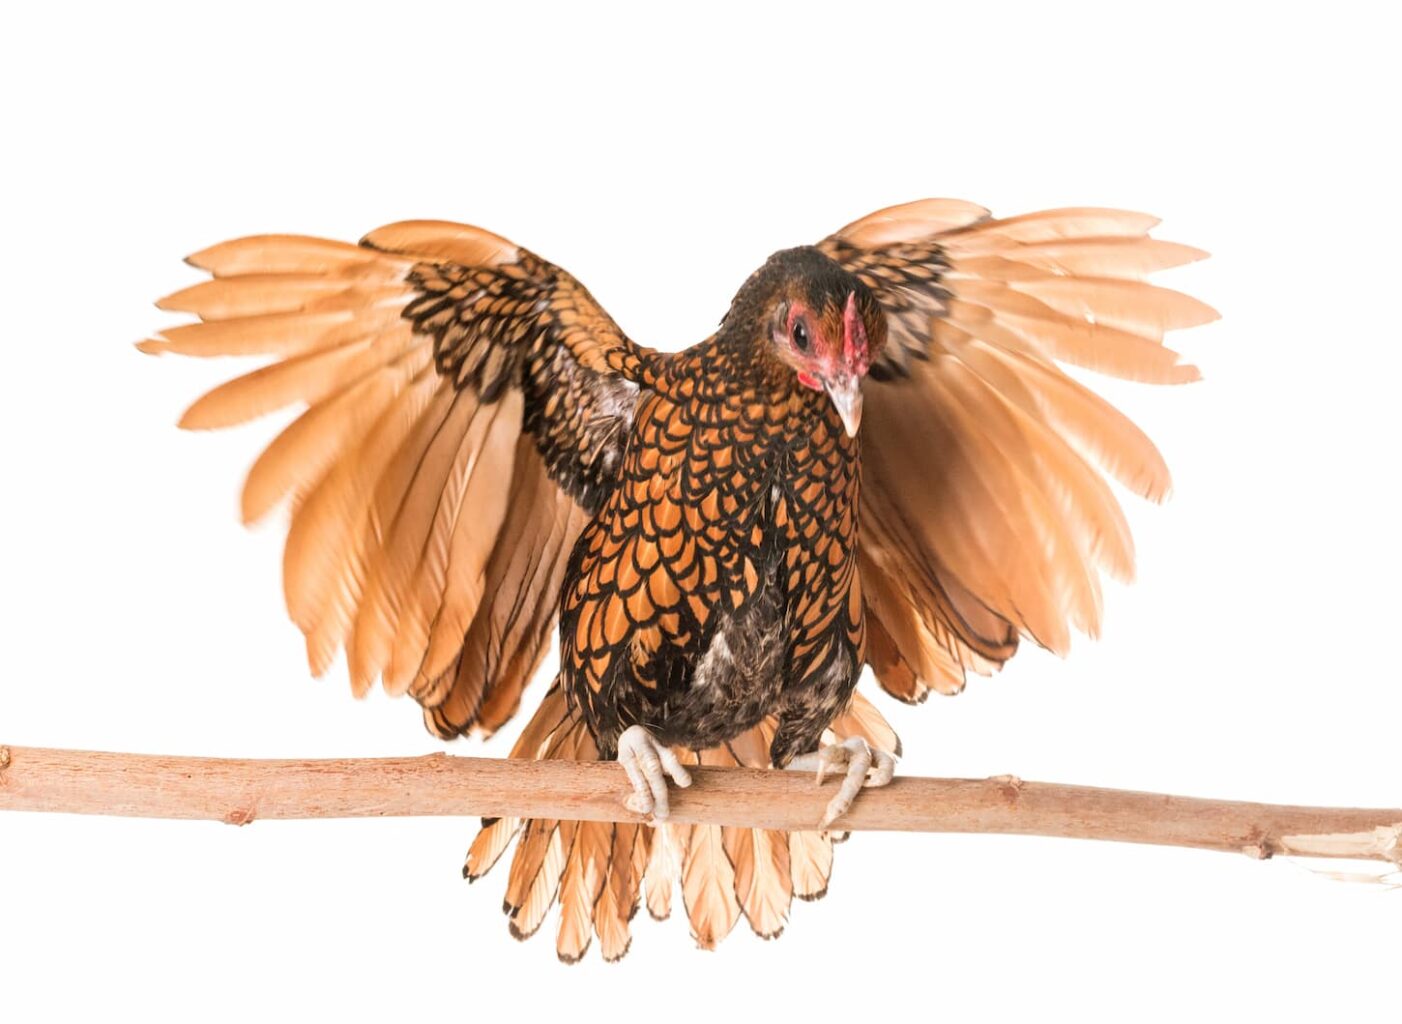 An image of a golden Sebright chicken in front of white background.